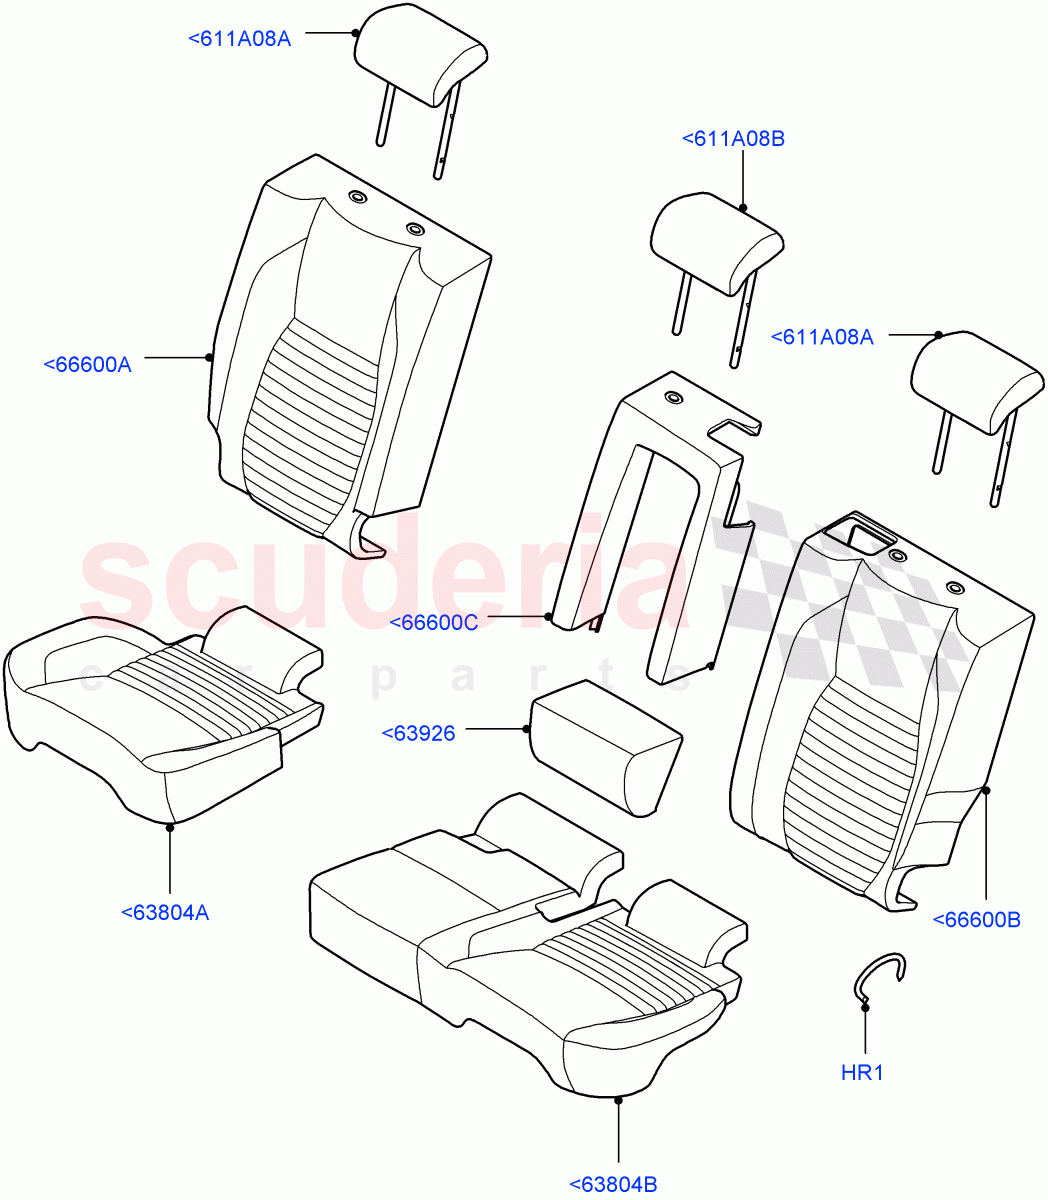 Rear Seat Covers(Taurus Leather Perforated,Itatiaia (Brazil),60/40 Load Through With Slide)((V)FROMLT000001) of Land Rover Land Rover Discovery Sport (2015+) [2.0 Turbo Petrol GTDI]